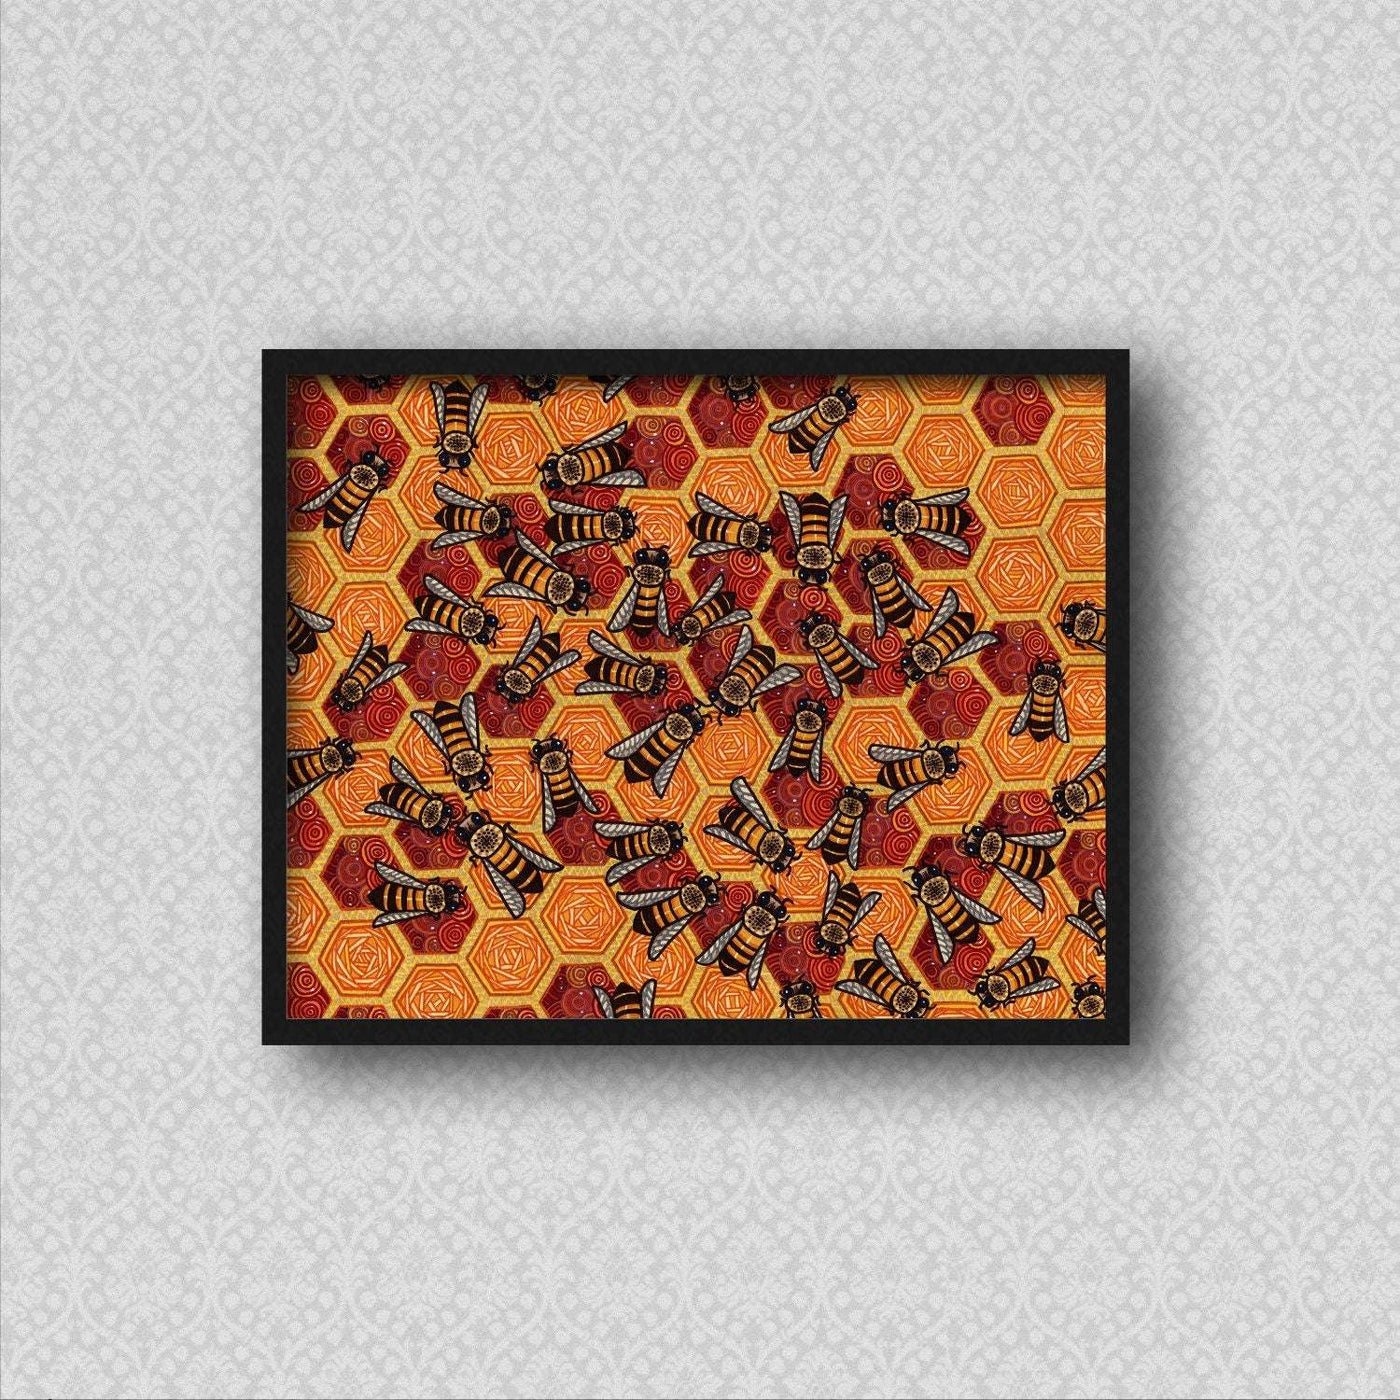 Framed print of honeycomb pattern with bees on a wall